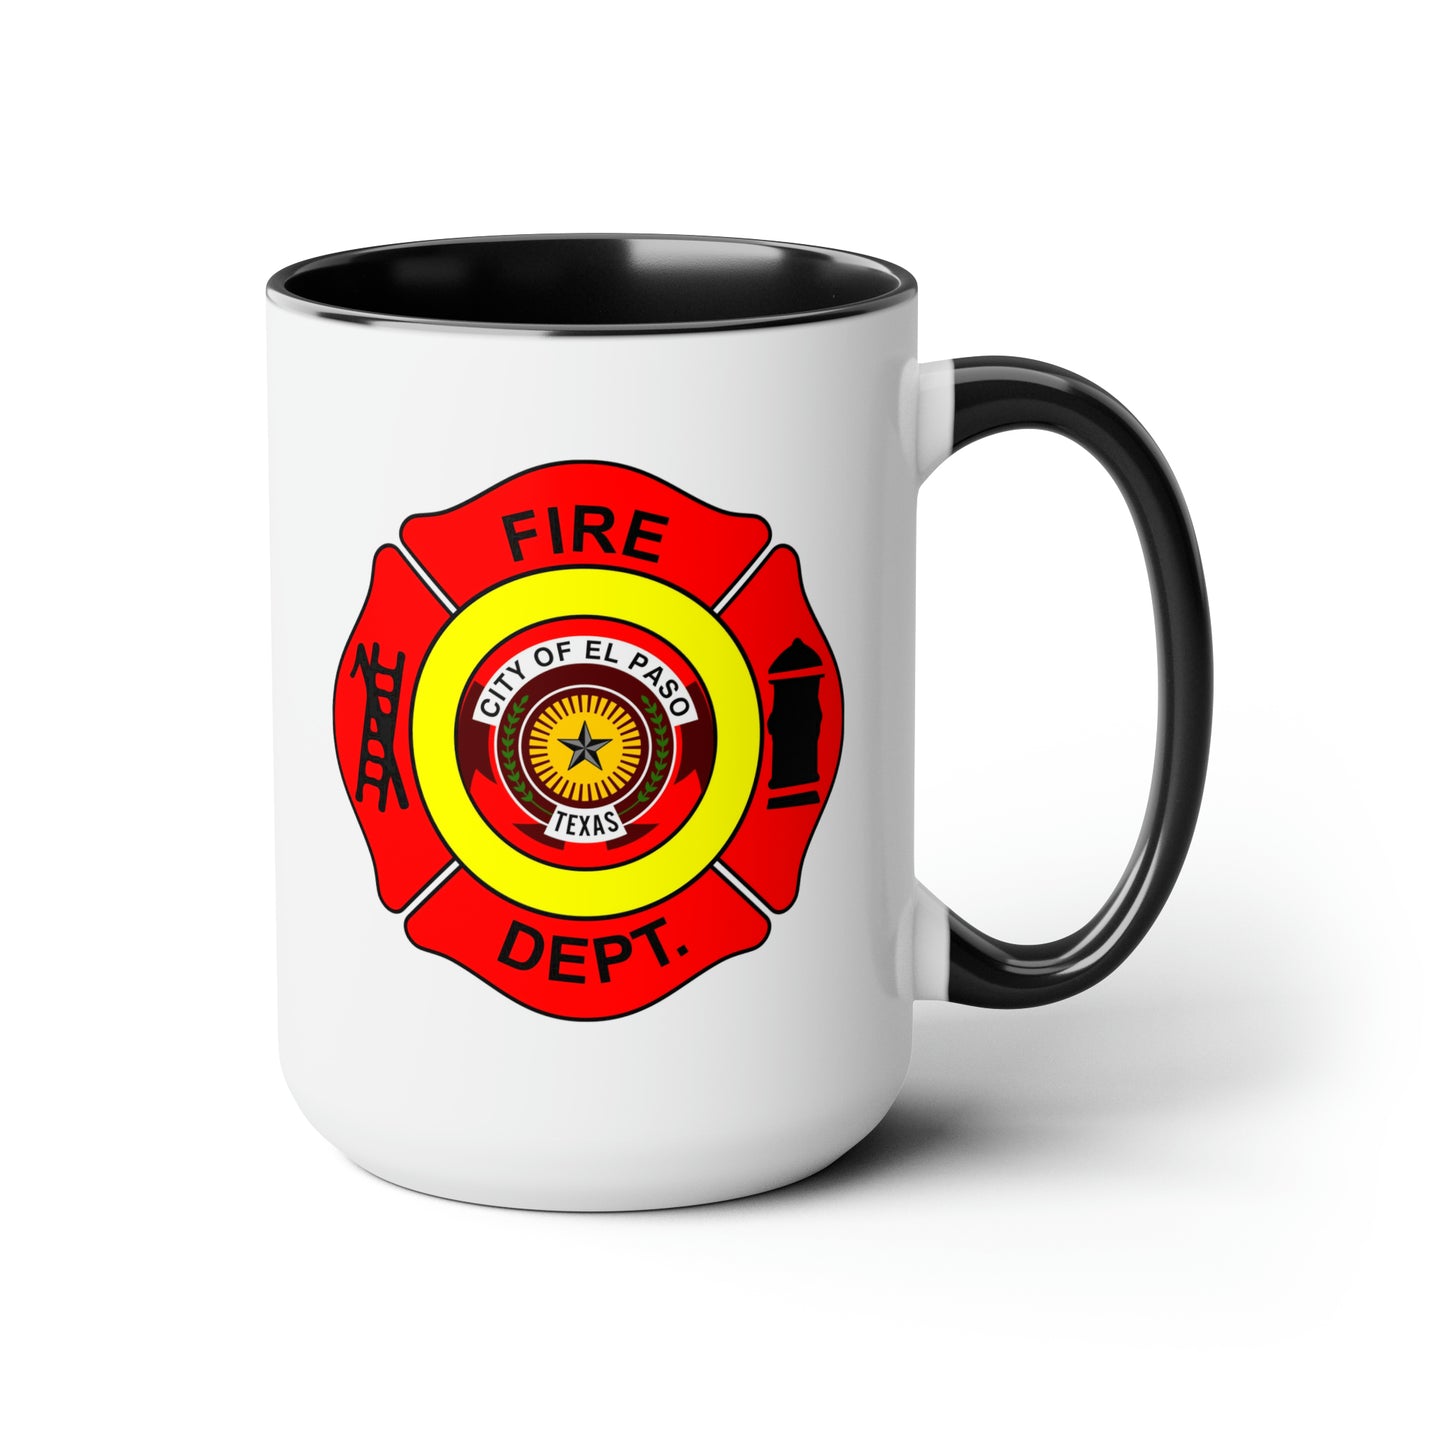 El Paso Fire Department Coffee Mug - Double Sided Black Accent White Ceramic 15oz by TheGlassyLass